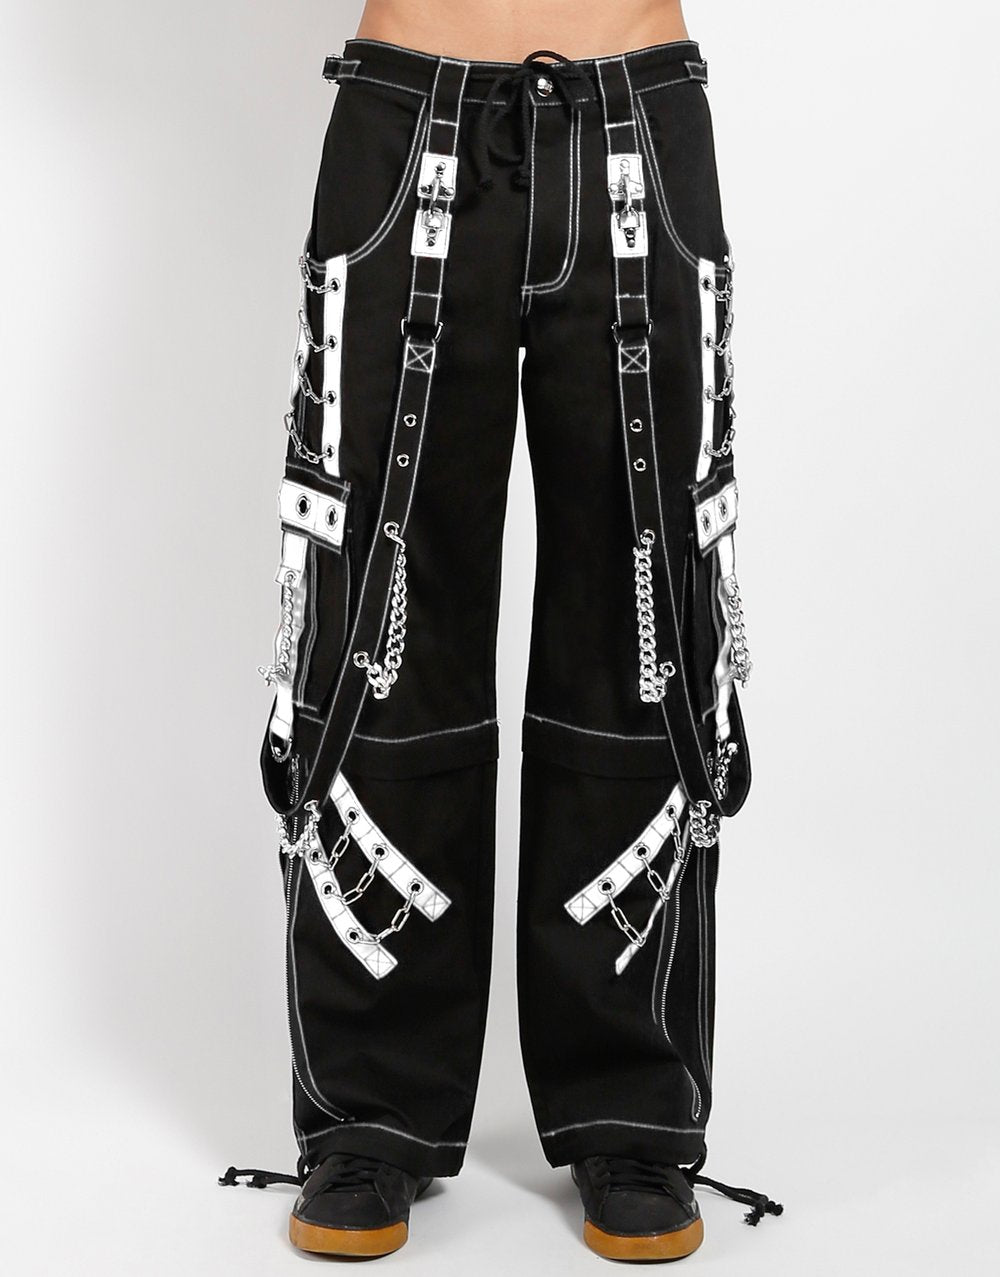 front of Black and white pants feature white stitching, removable straps, adjustable ankles, D-rings, clasps, and deep pockets.